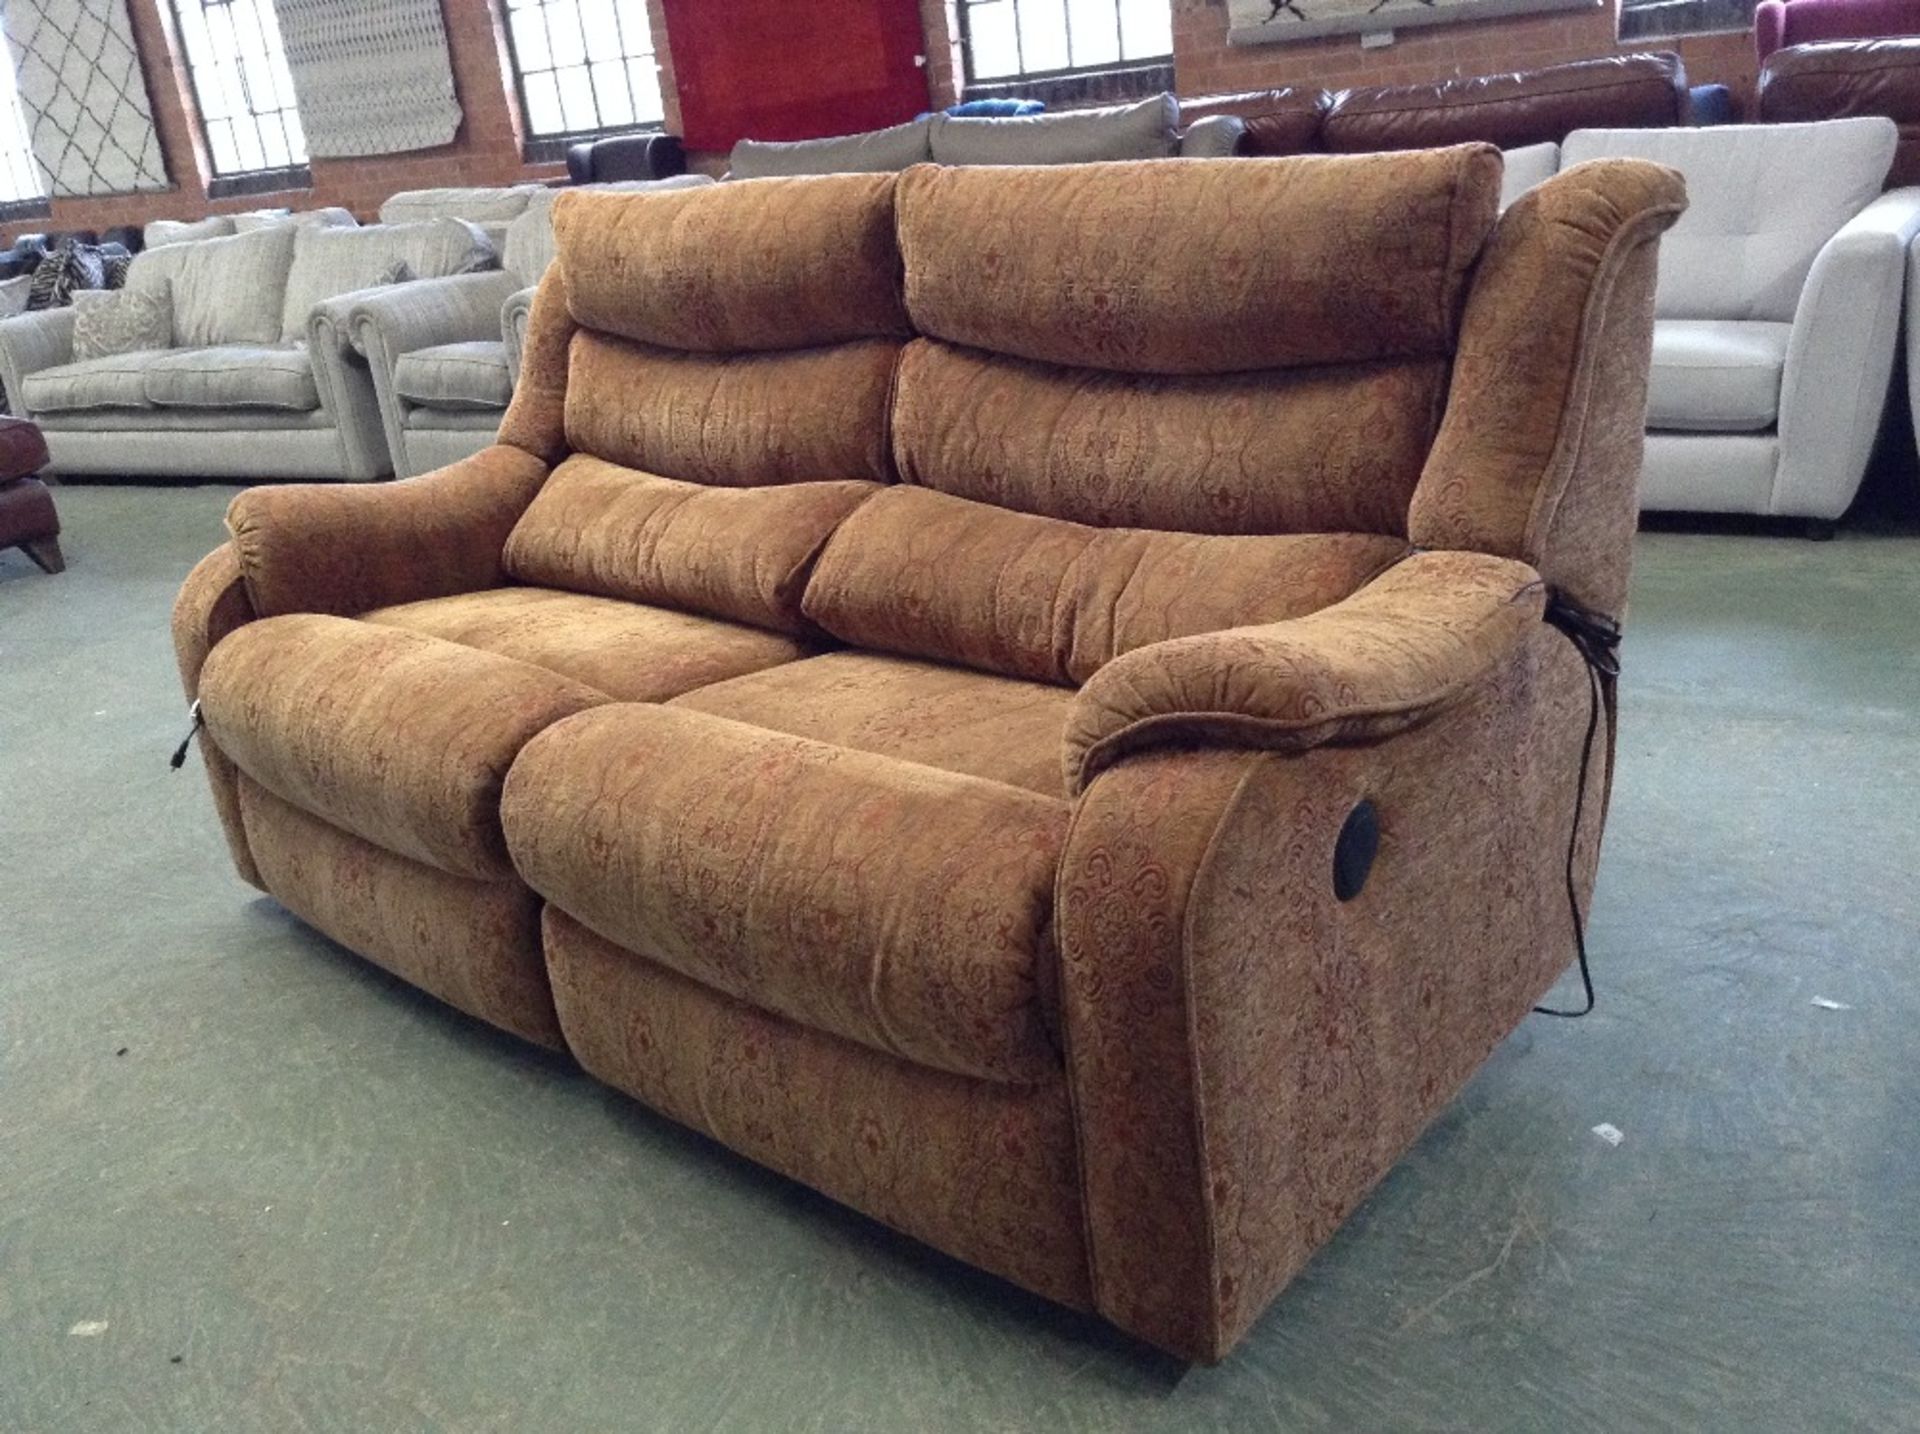 COPPER VPATTERNED ELECTRIC RECLINING 3 SEATER SOFA